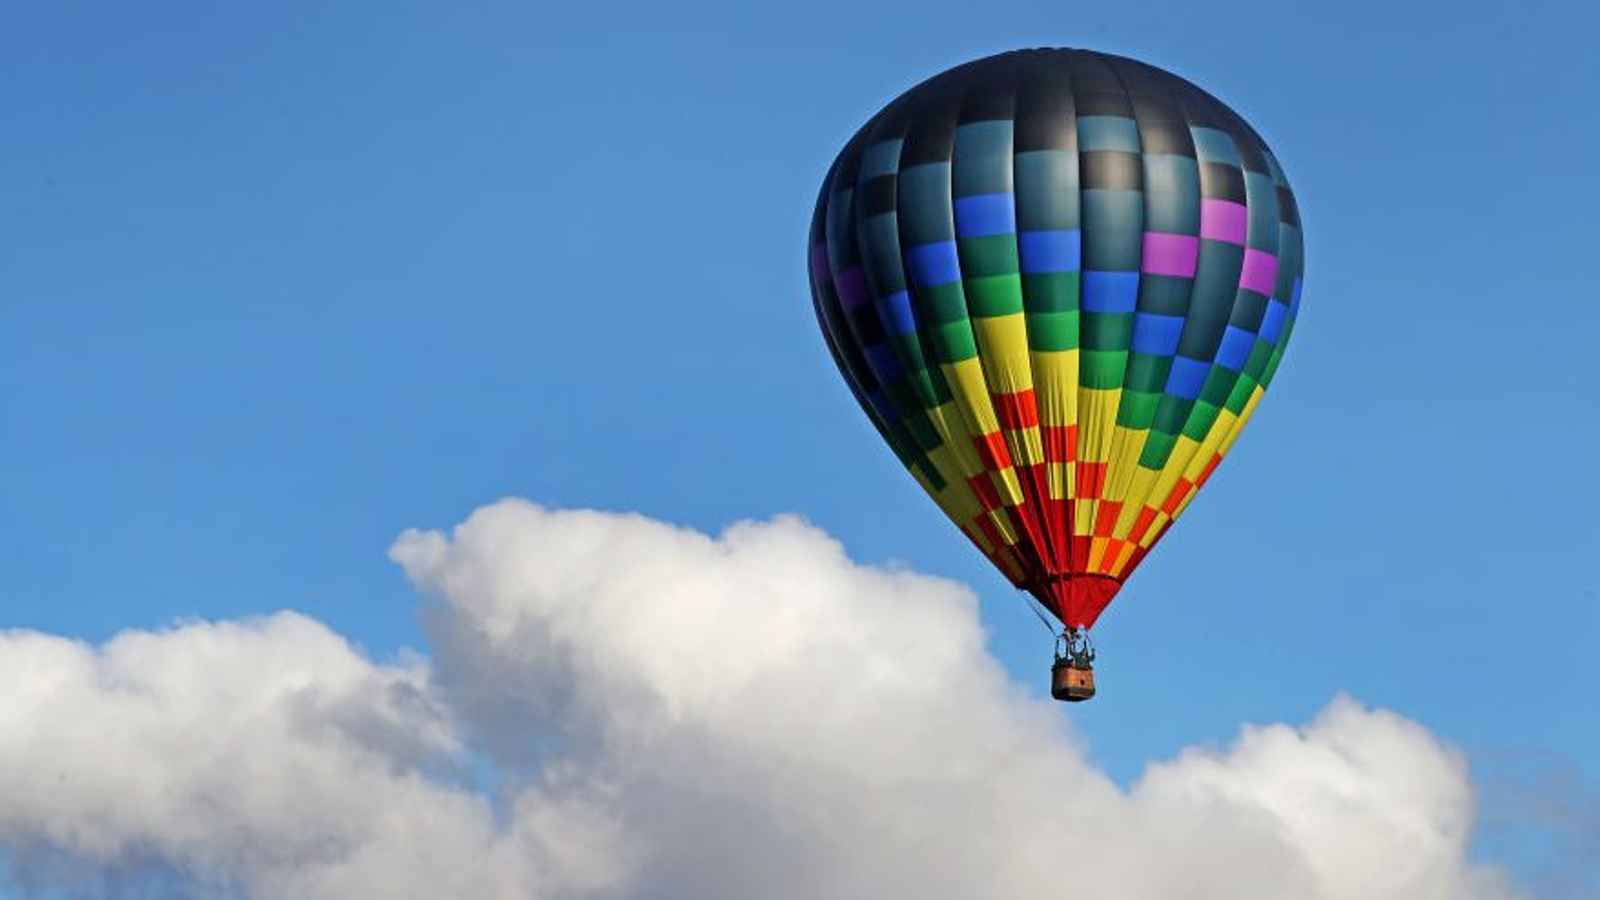 Hot Air Balloon Day 2023: Date, History, Facts, Activities